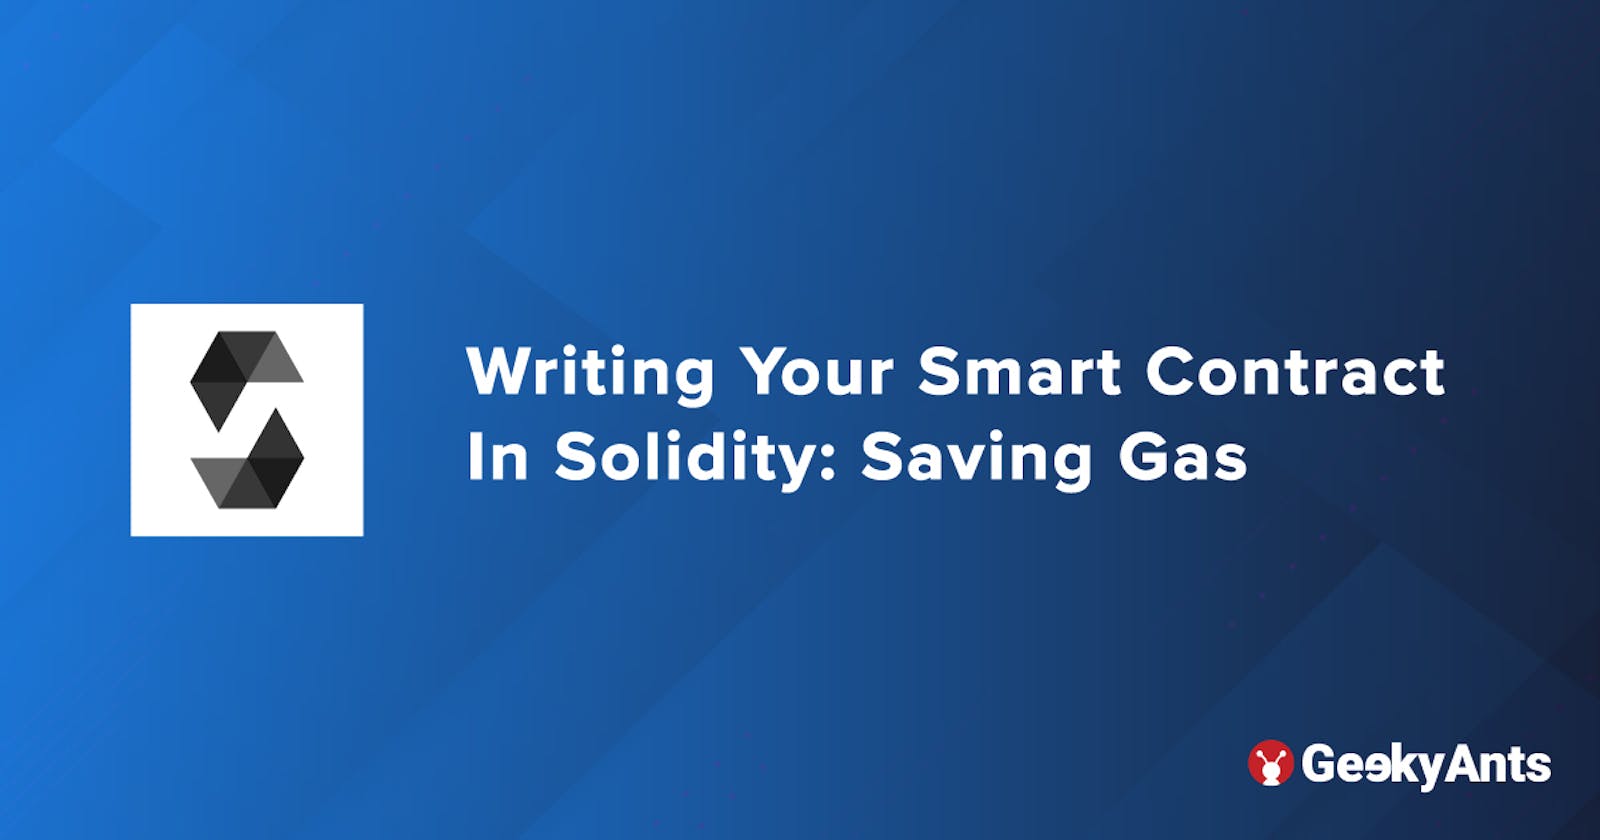 How To Save Gas When Writing Your Smart Contract In Solidity?